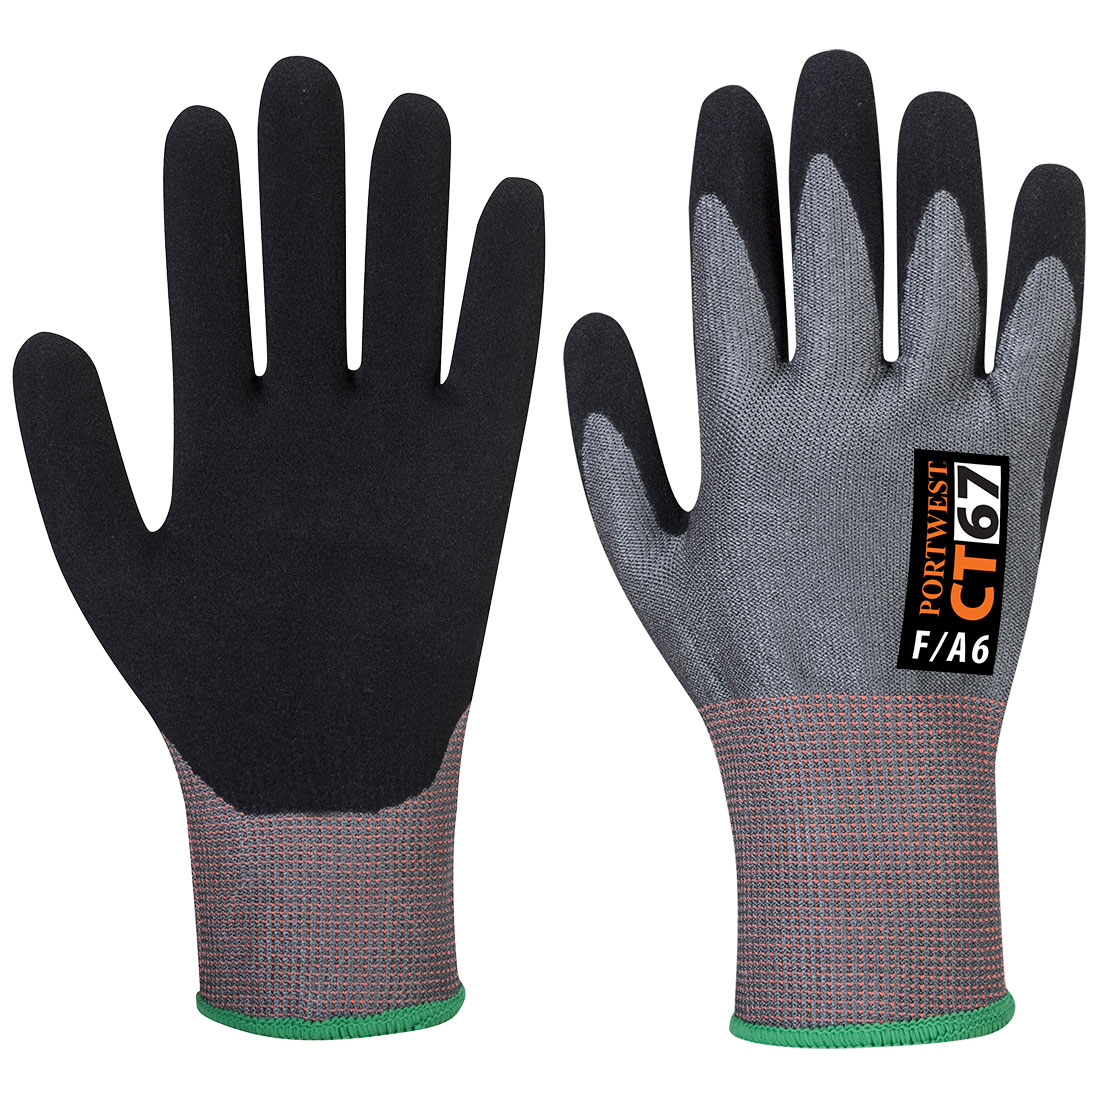 CT67  Portwest® A6 Cut Resistant Seamless Knit Nitrile Foam Coated Work Gloves